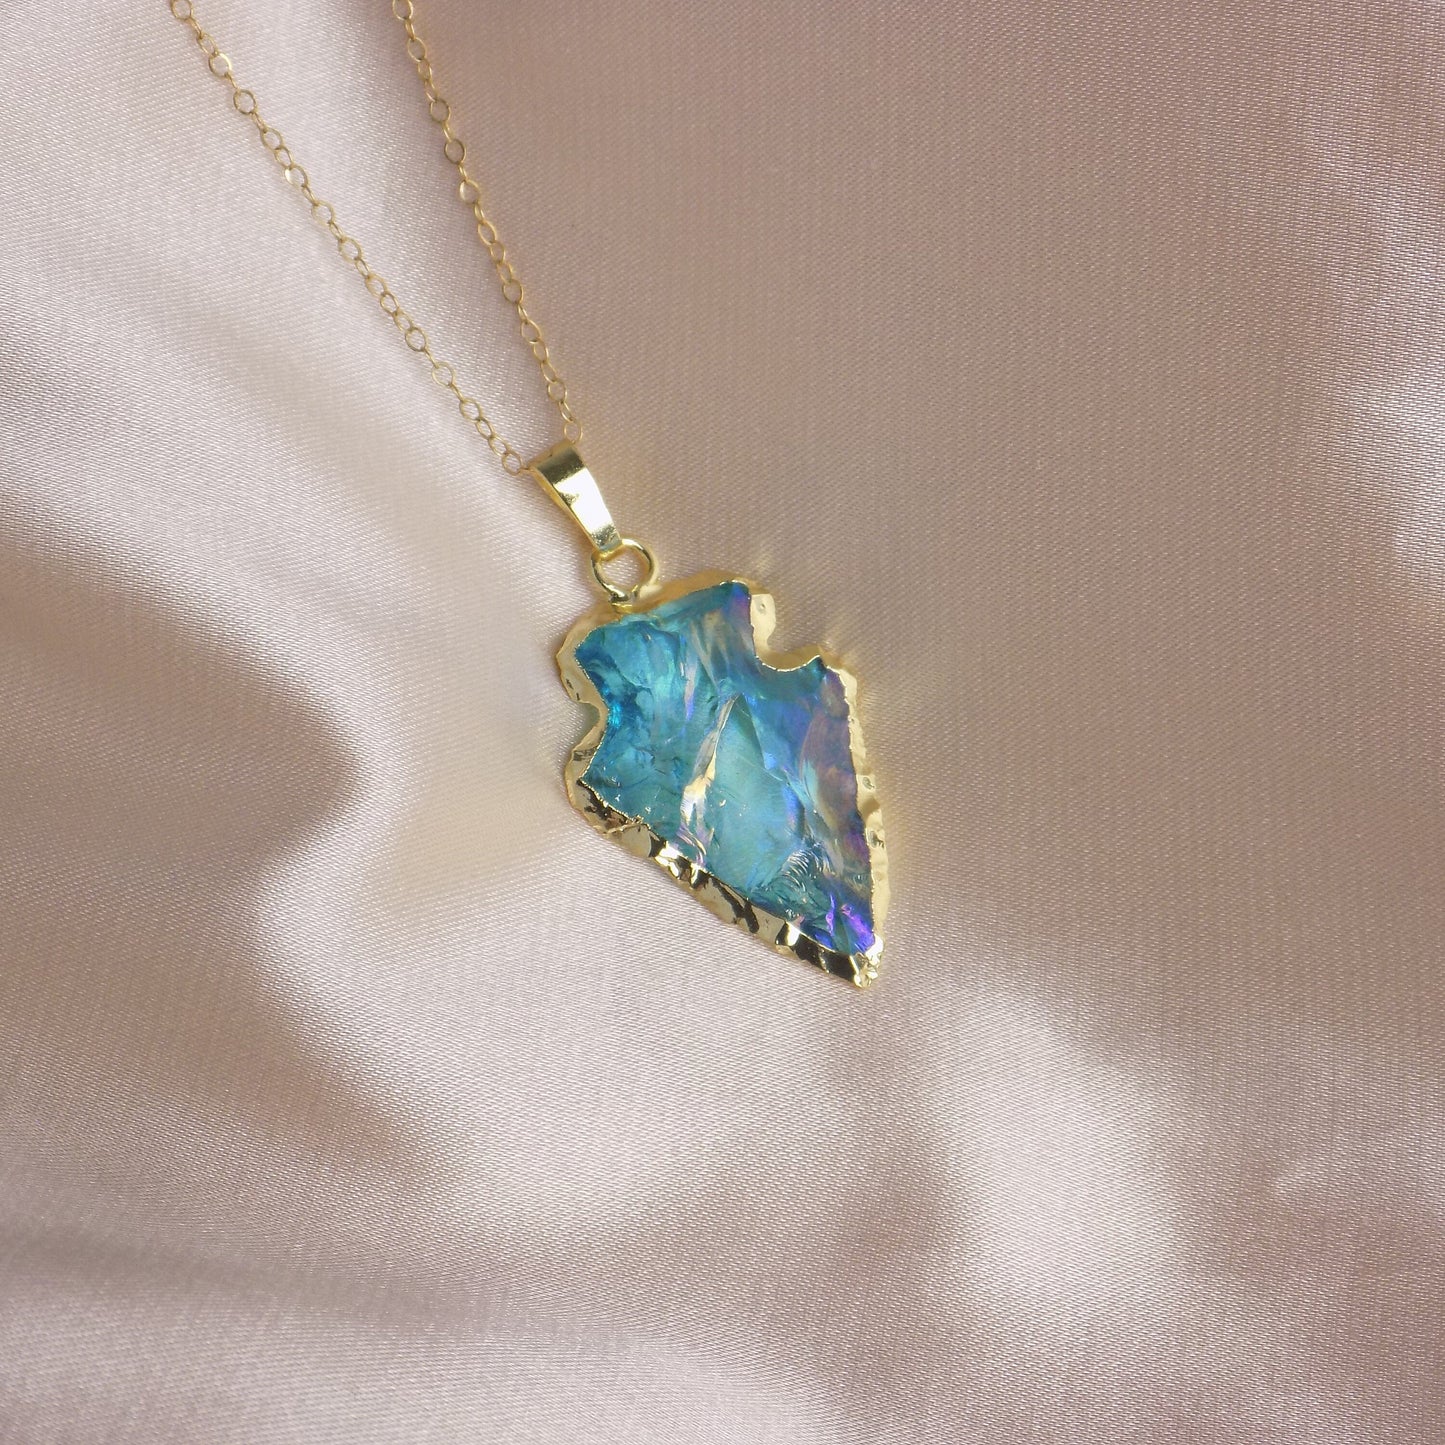 Turquoise Aura Quartz Arrowhead Necklace Gold, Unique Iridescent Crystal Jewelry Boho, Gift For Her, M7-04